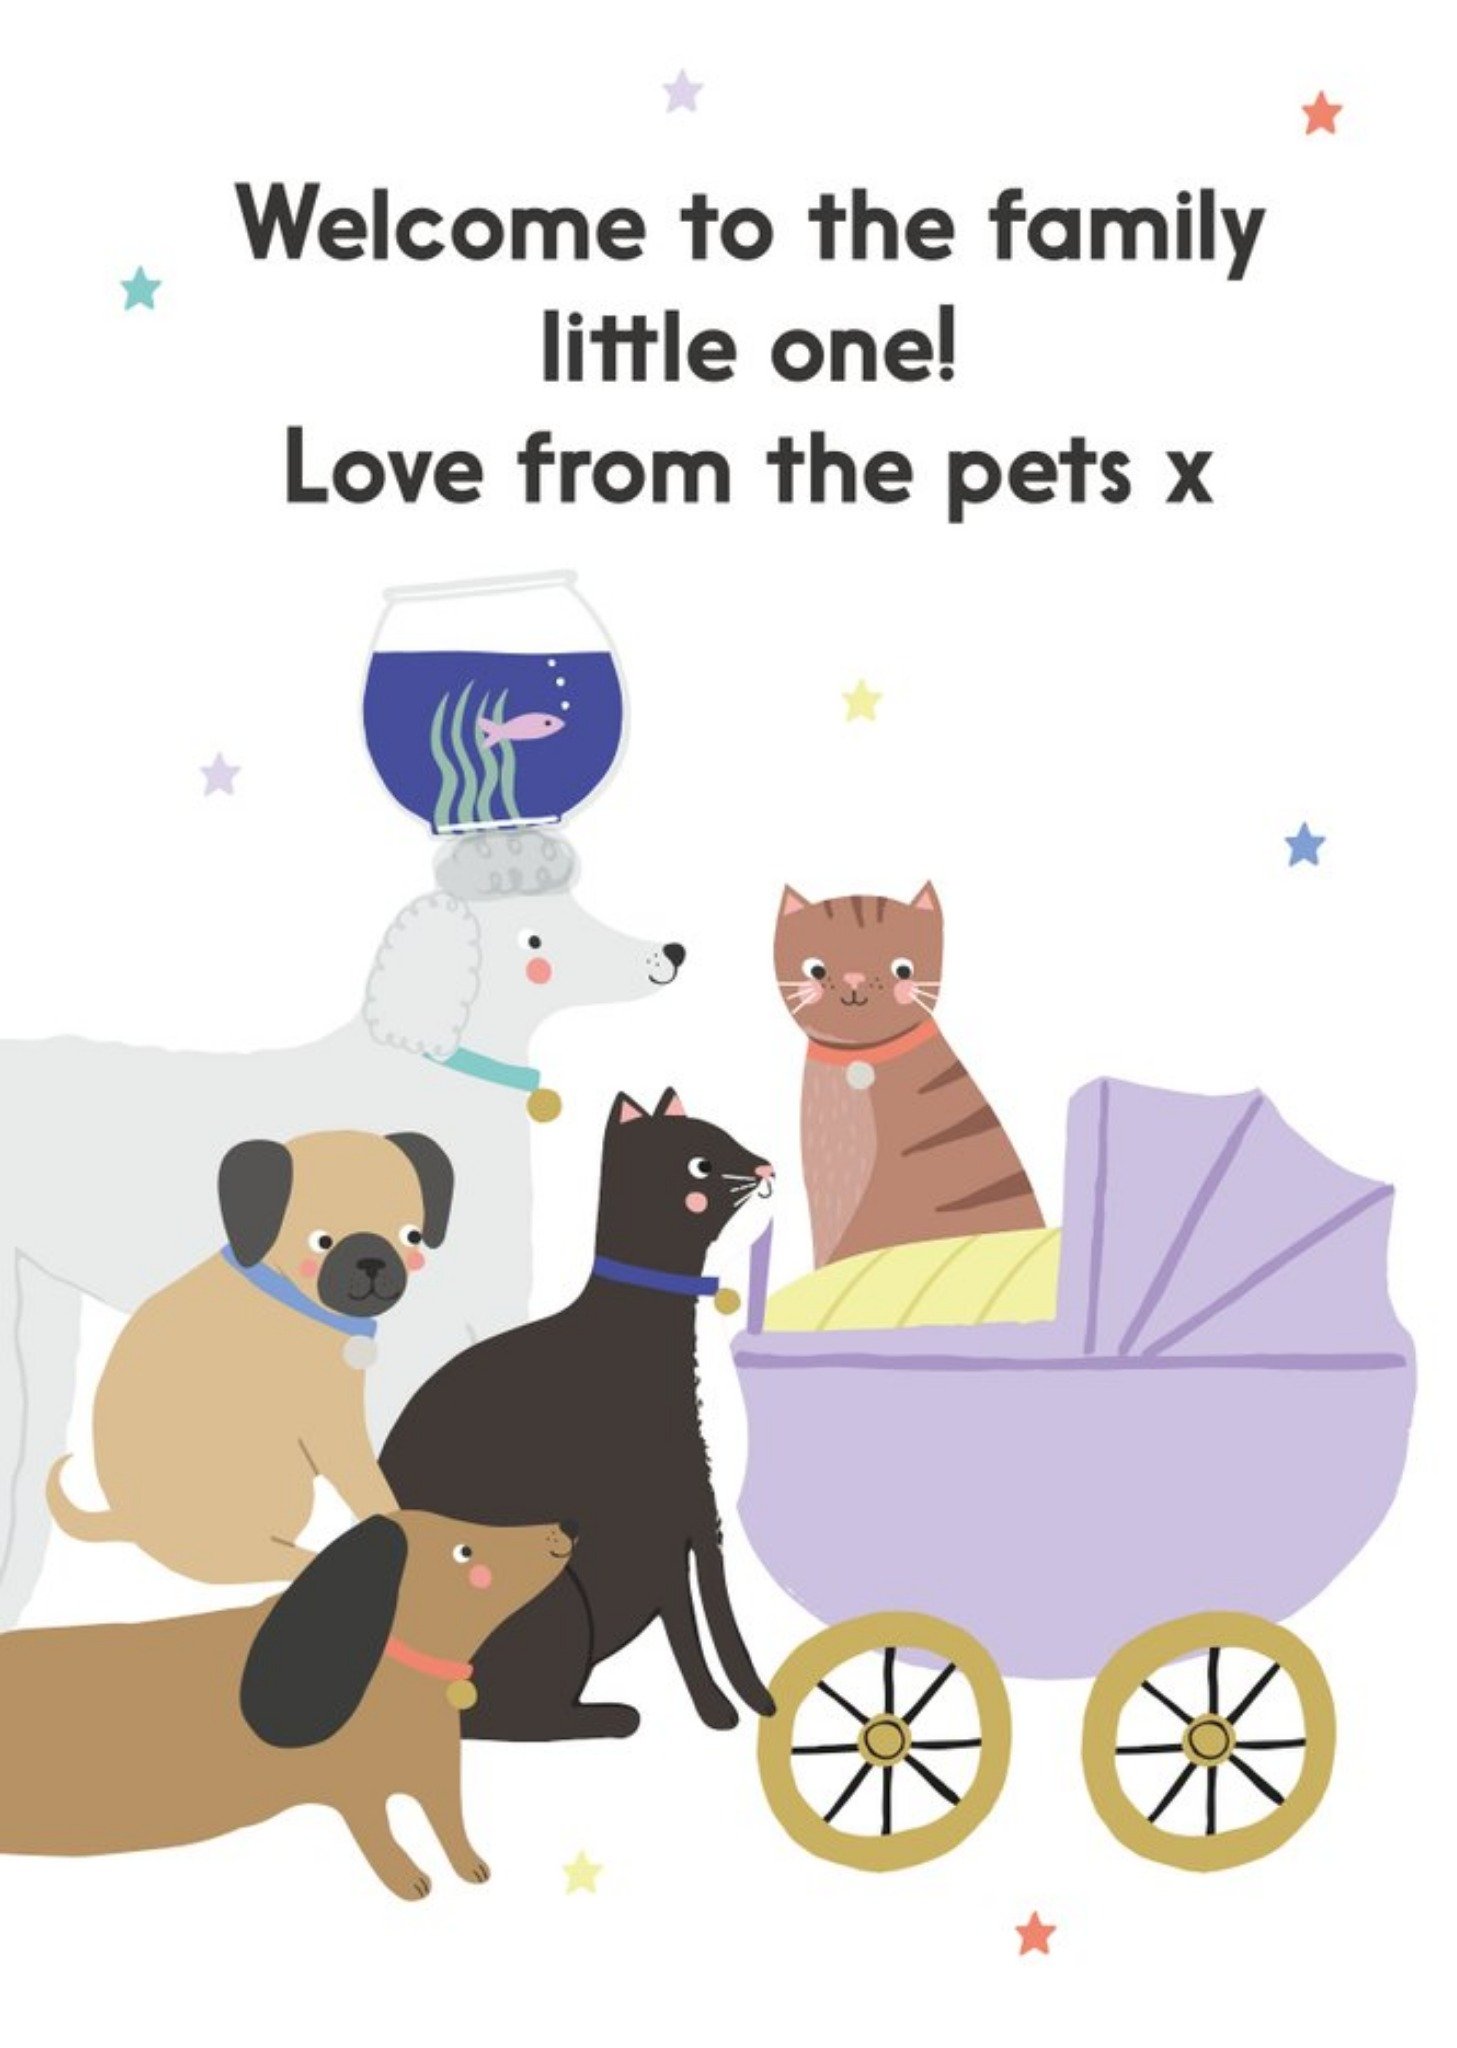 Moonpig Illustrated Cute New Baby Welcome To The Family From The Pets Card X Ecard